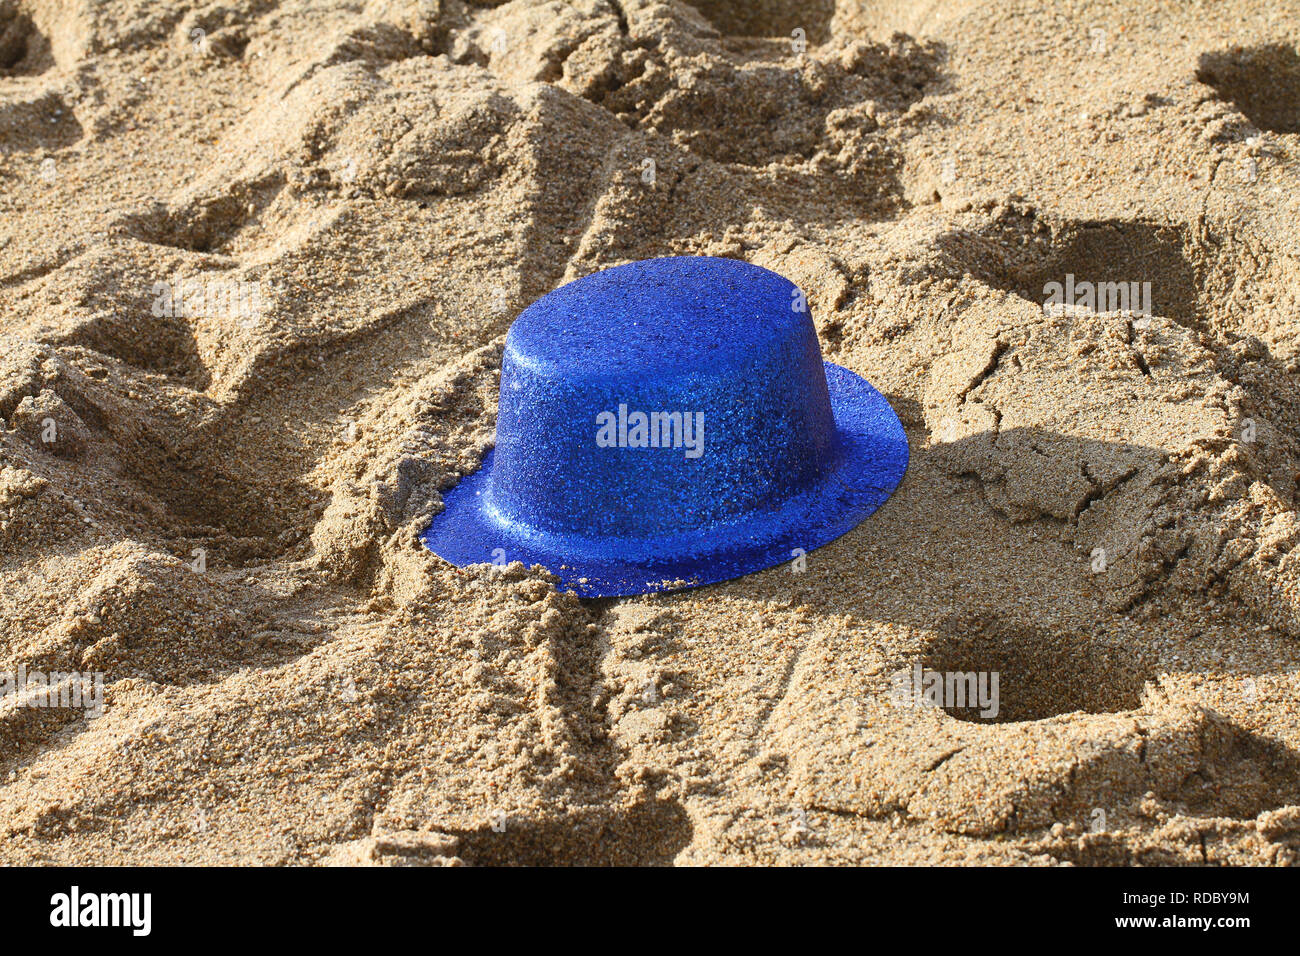 blue glittery party hat abandoned on the beach after a celebration or party Stock Photo